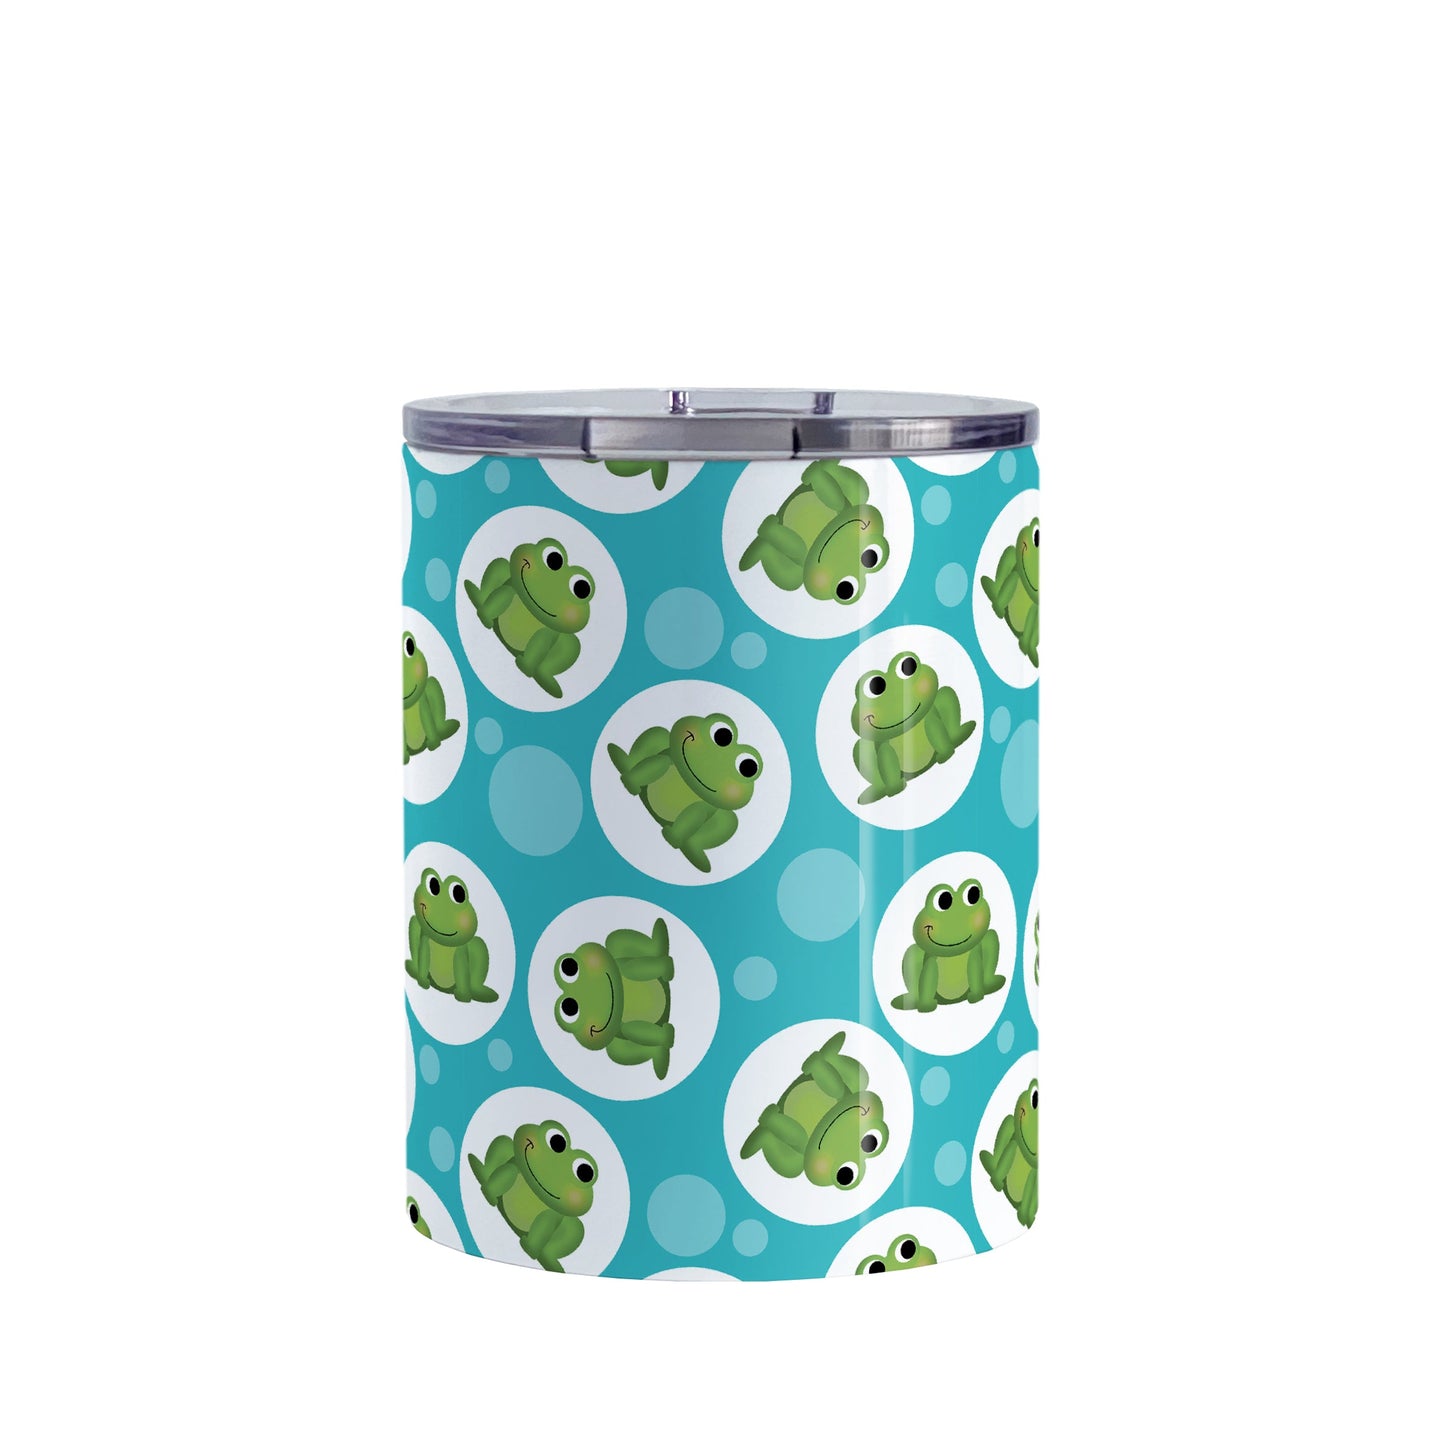 Cute Turquoise Frog Pattern Tumbler Cup (10oz, stainless steel insulated) at Amy's Coffee Mugs